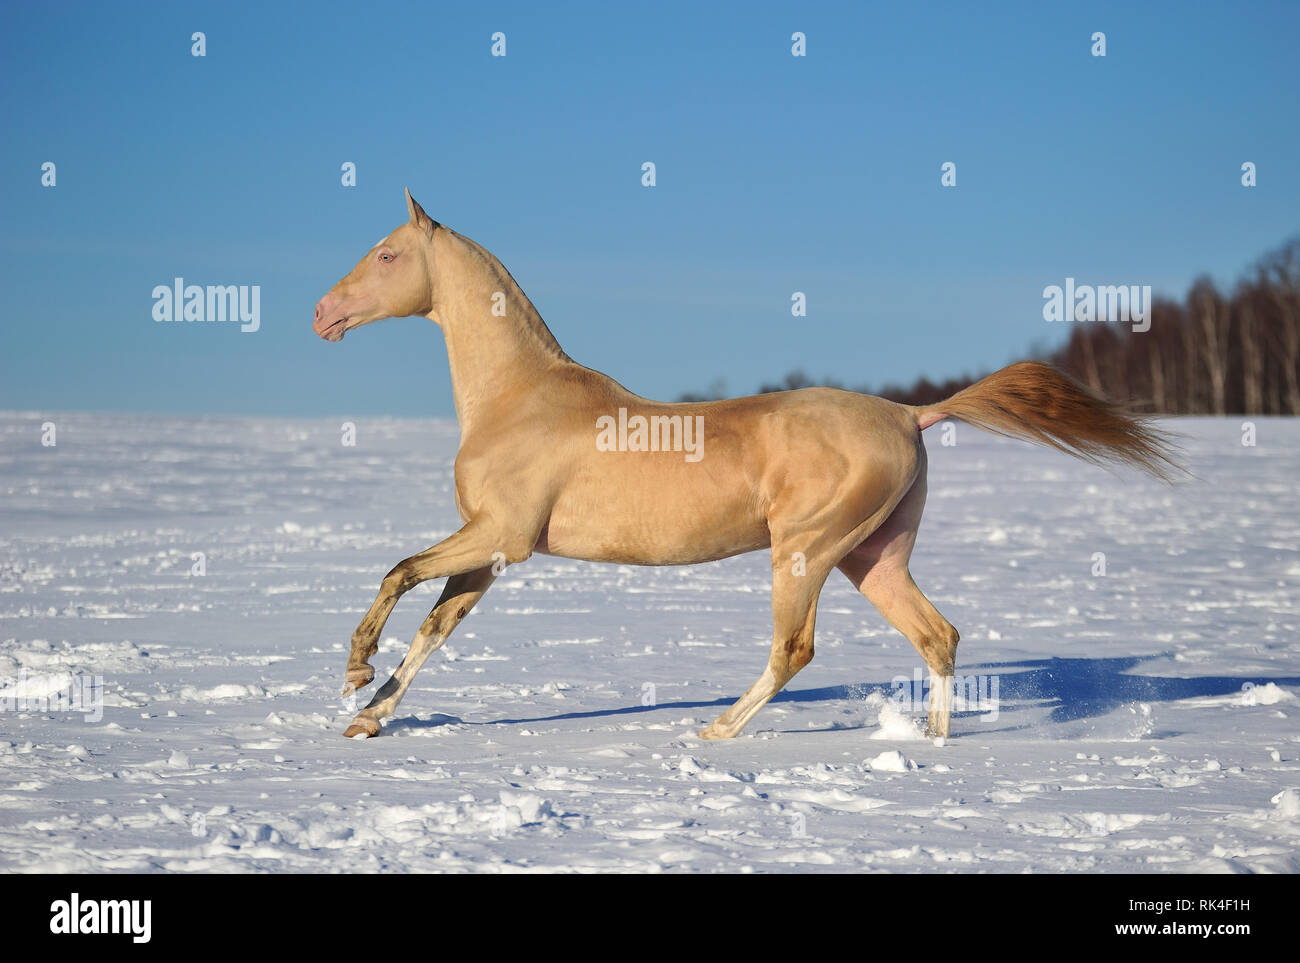 Cremello stallion gallops in the chill snowy morning across winter field. Horizontal, side view, in motion. Stock Photo